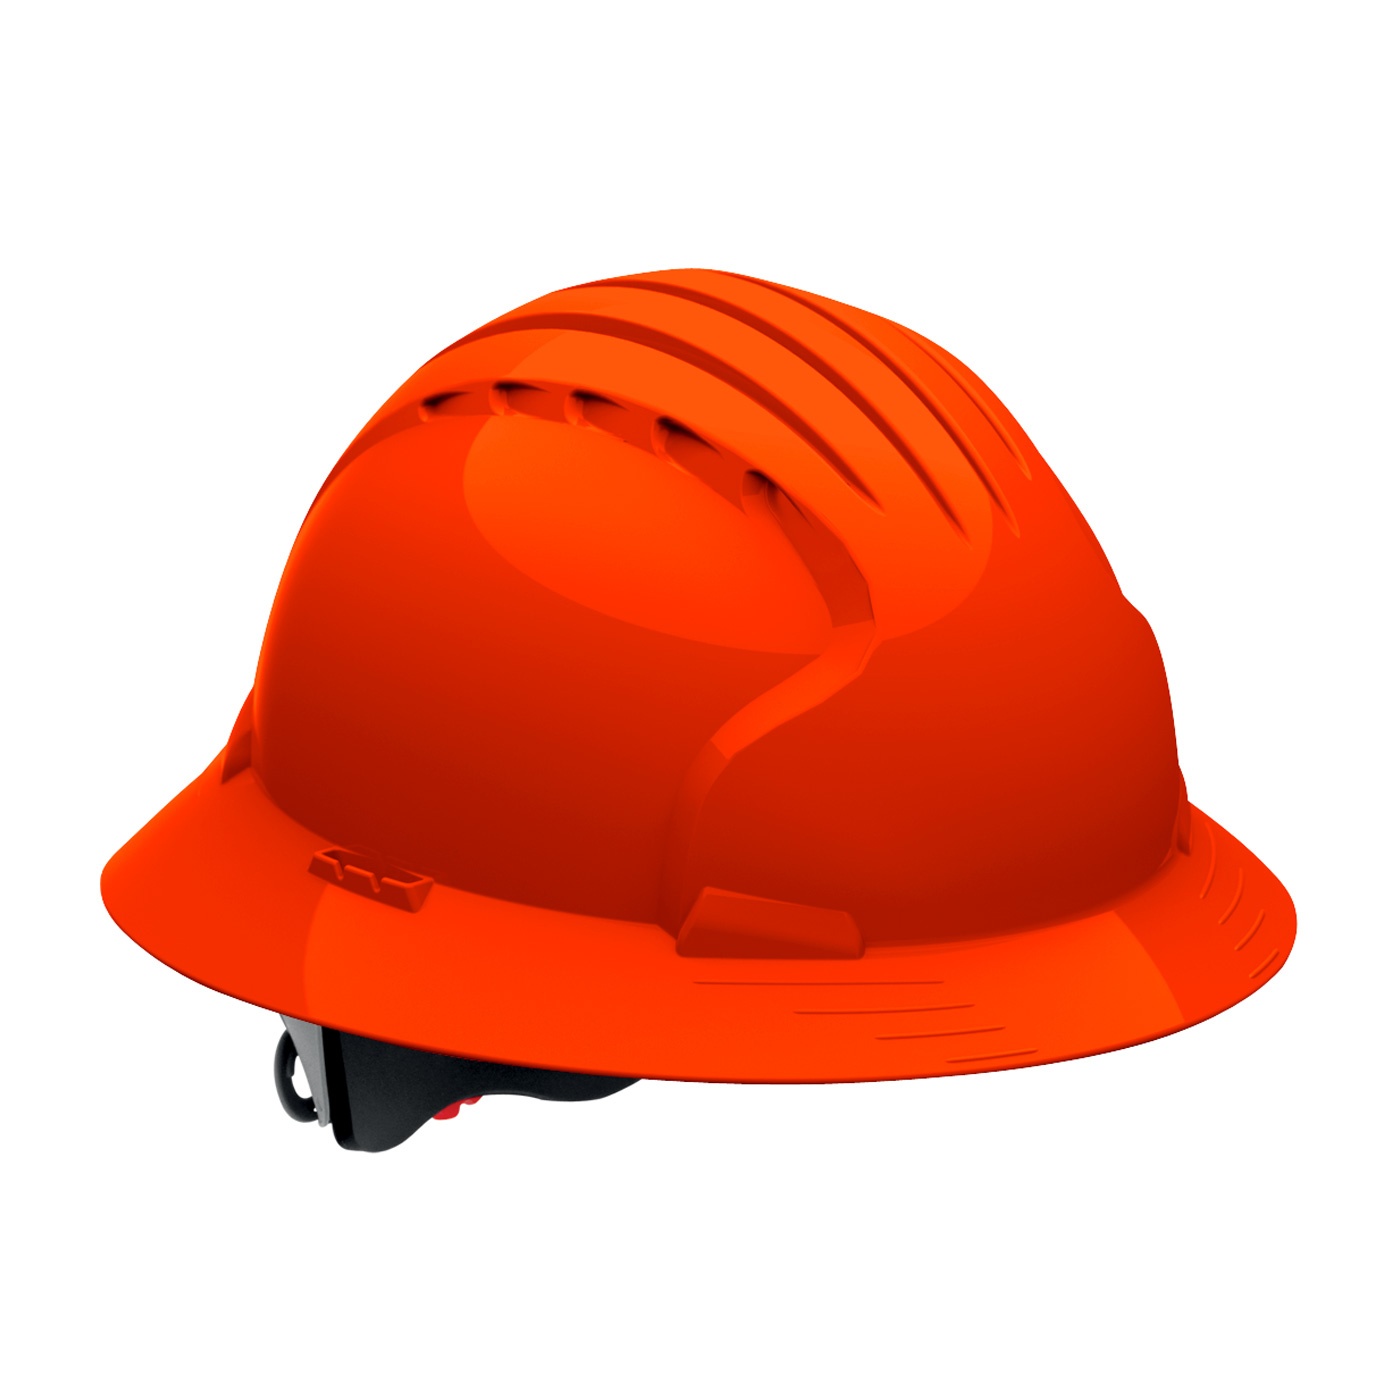 JSP 6161 Evolution Deluxe Full Brim Hard Hat from Columbia Safety